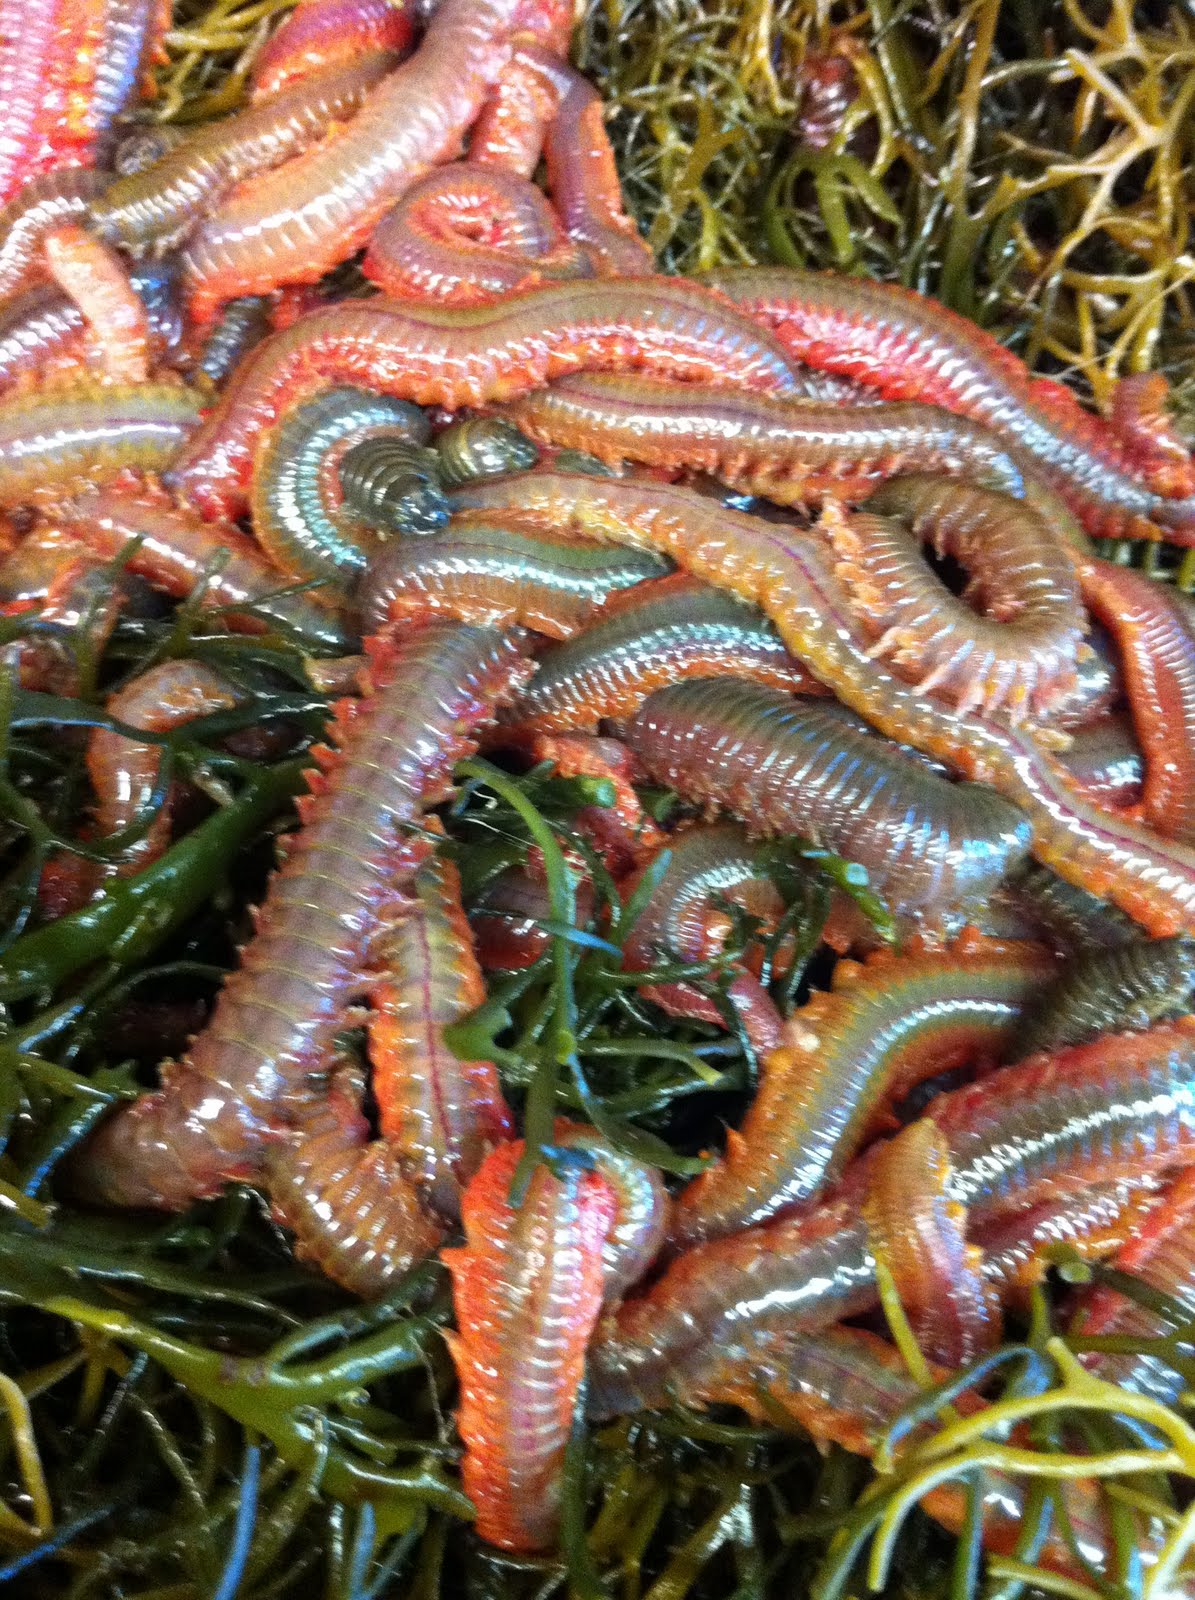 Captain Morgan's Fishing Blog: THE ABC'S OF SEAWORM SHORTAGES IN